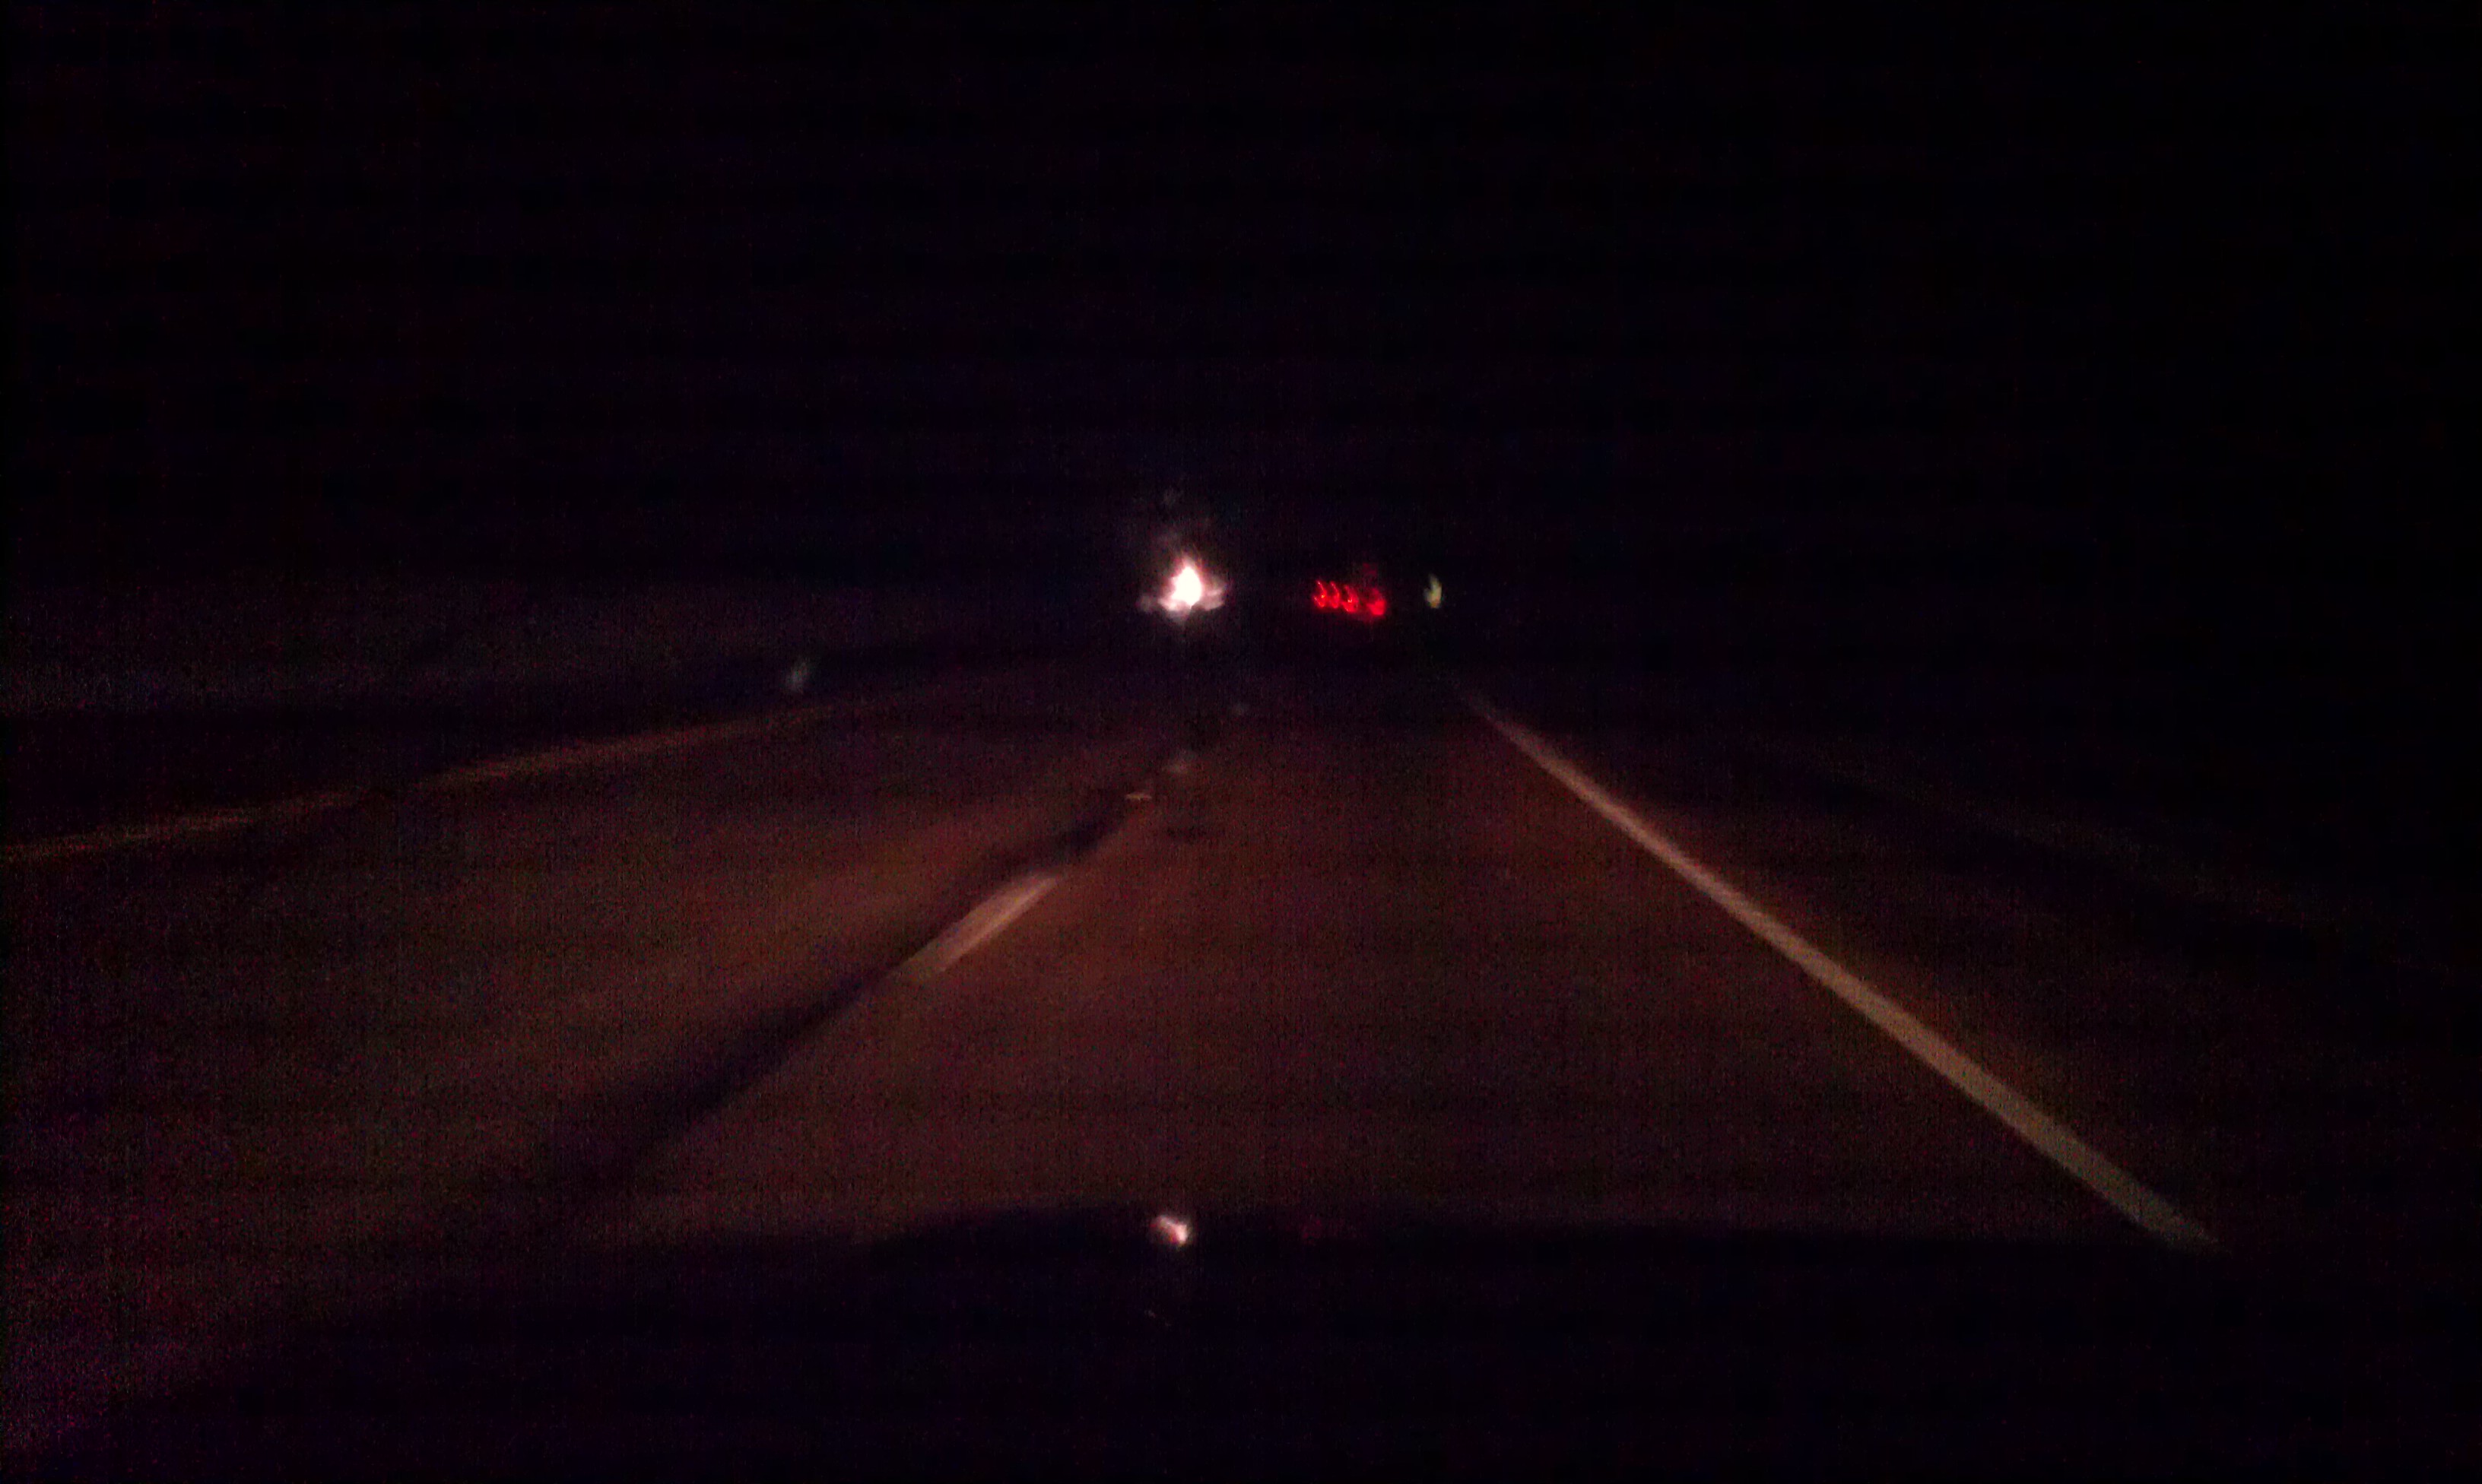 On the road again... Somewhere on I-35 at 4 in the morning, on the way to prison. https://www.orthodox.net//photos/prison-ministry-on-the-road-to-hughes-unit-2011-12-14.jpg